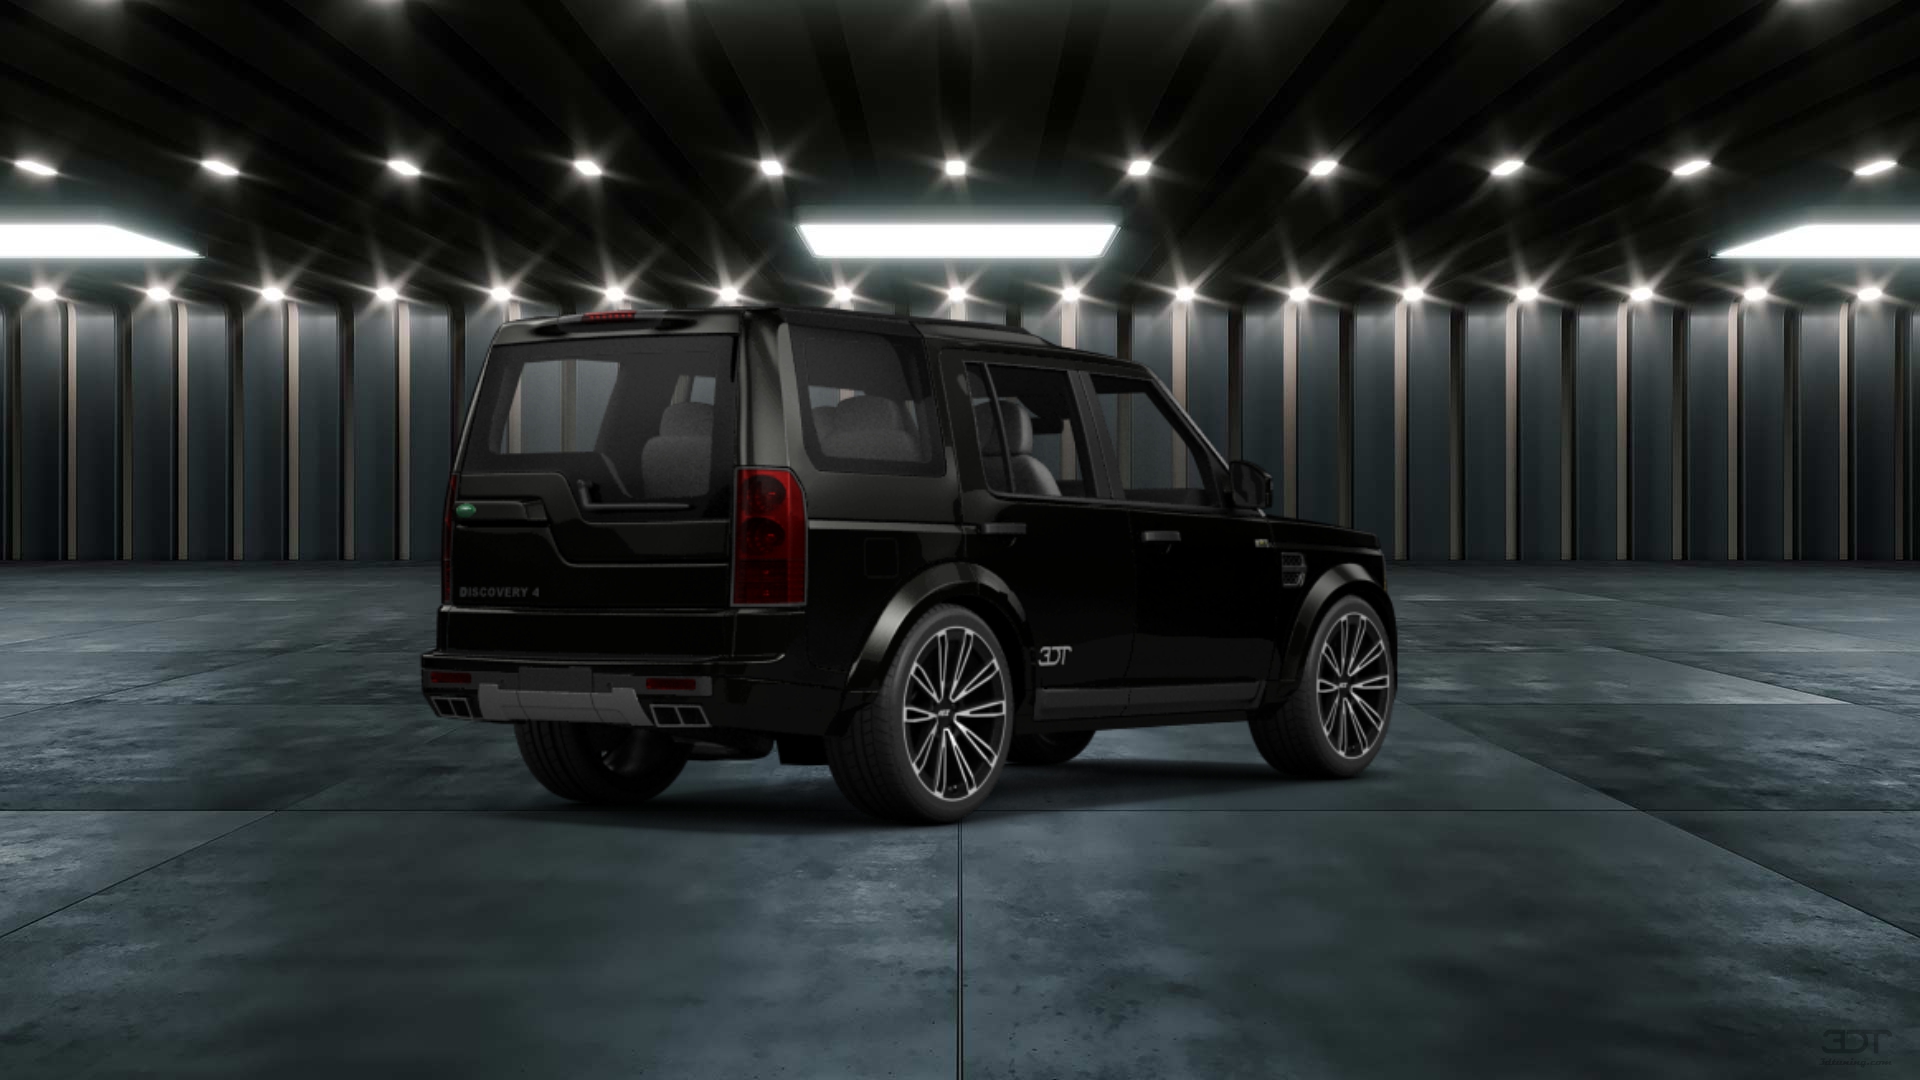 Range Rover Discovery 4 SUV 2012 tuning